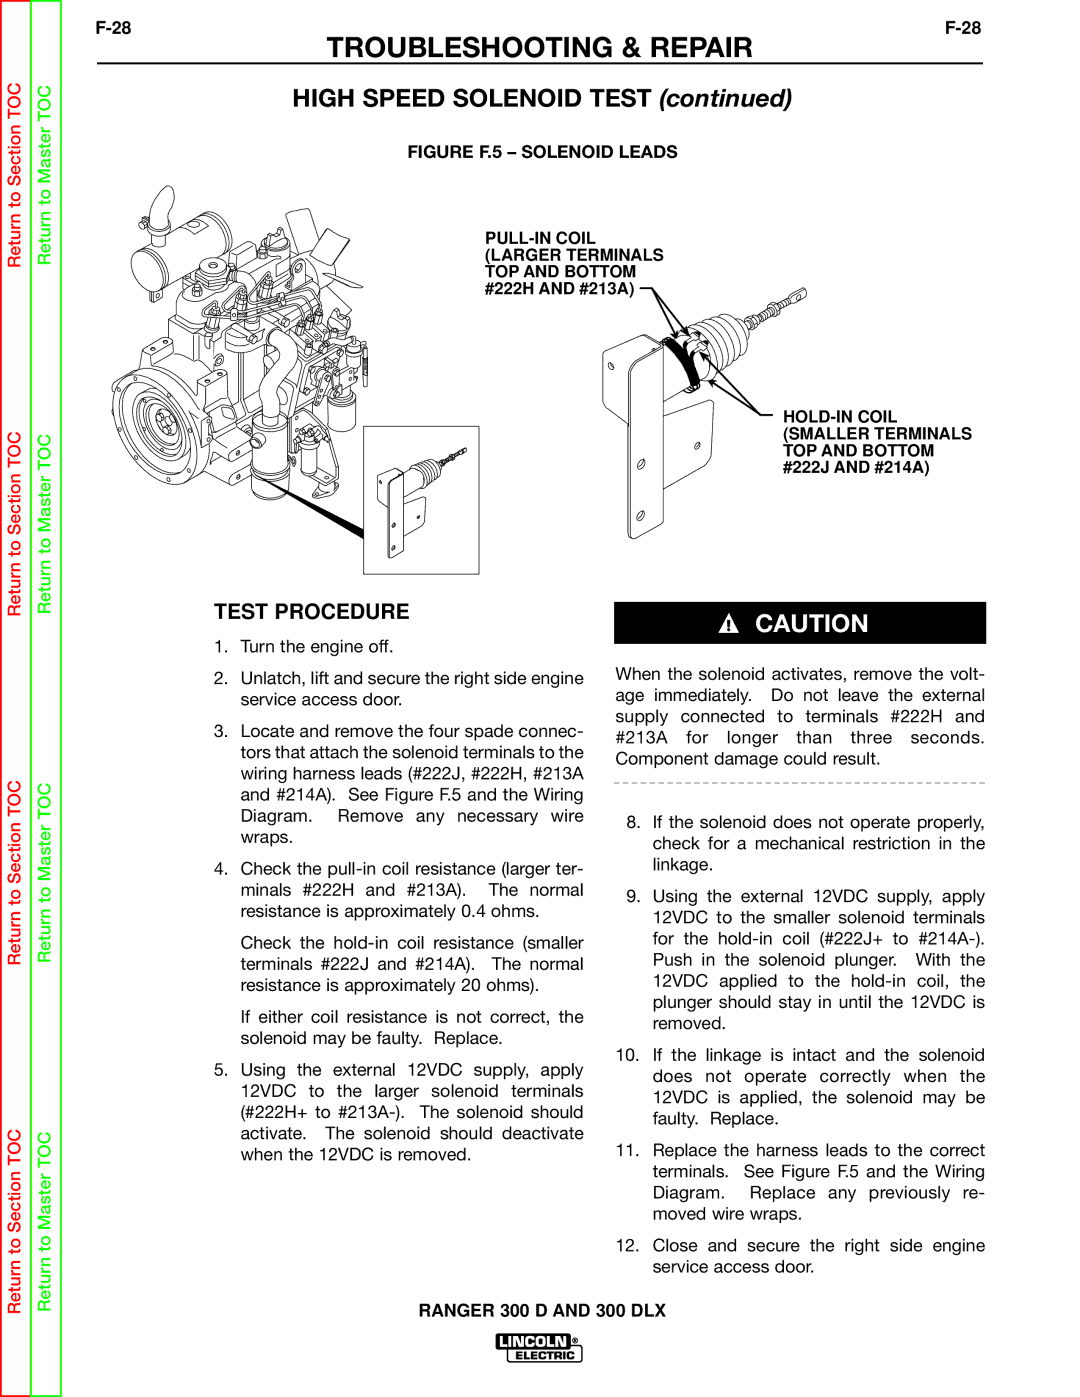 Lincoln Electric SVM148-B service manual High Speed Solenoid Test 